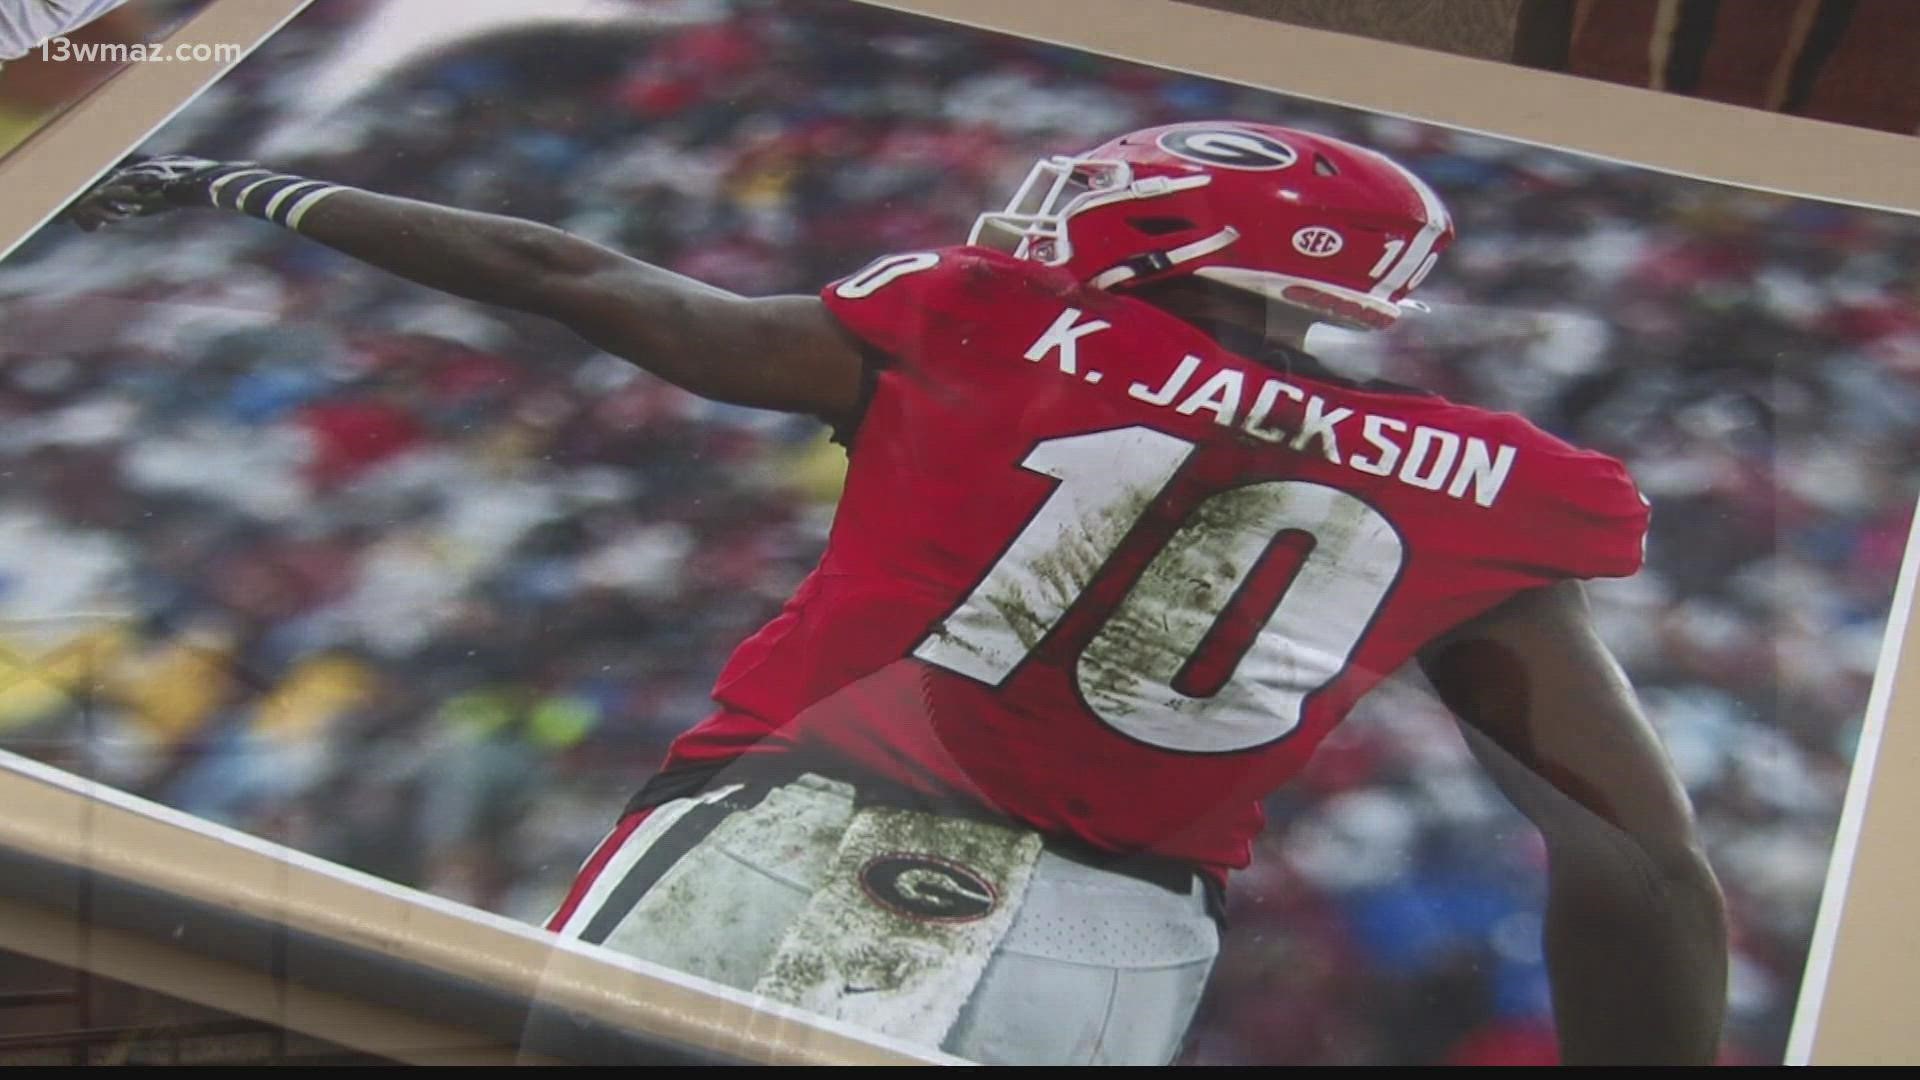 Kearis Jackson is coming off a breakout junior season, hauling in 36 catches for 514 yards, leading the Georgia Bulldogs to a 8-2 record